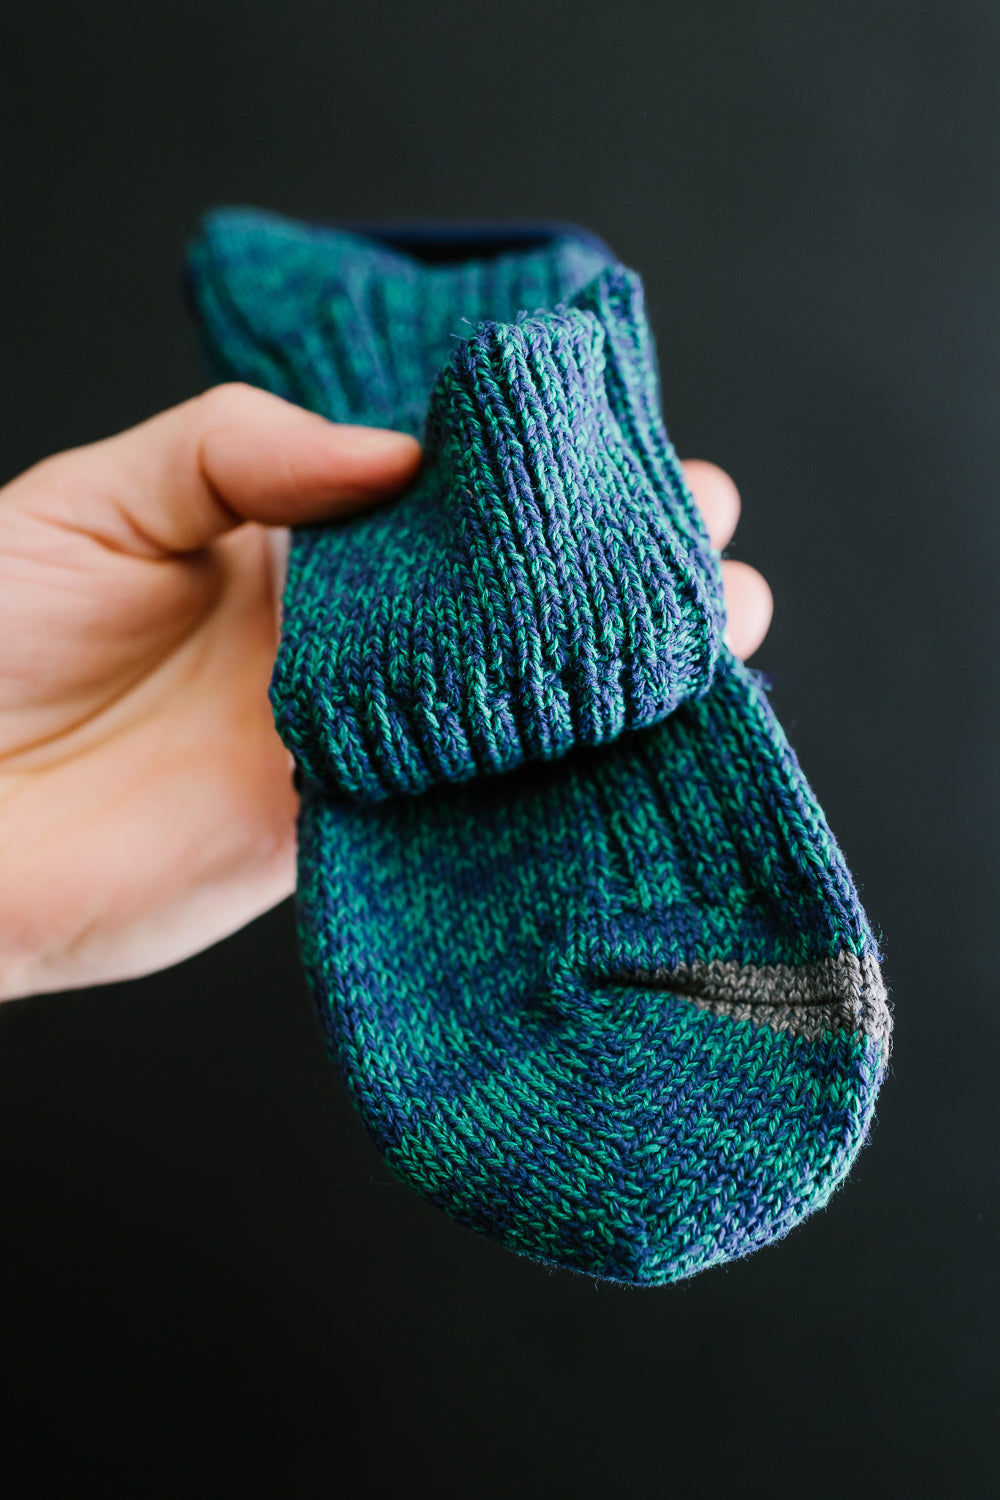 R1448 - Recycled Cotton Ribbed Crew Sock - Blue, Green